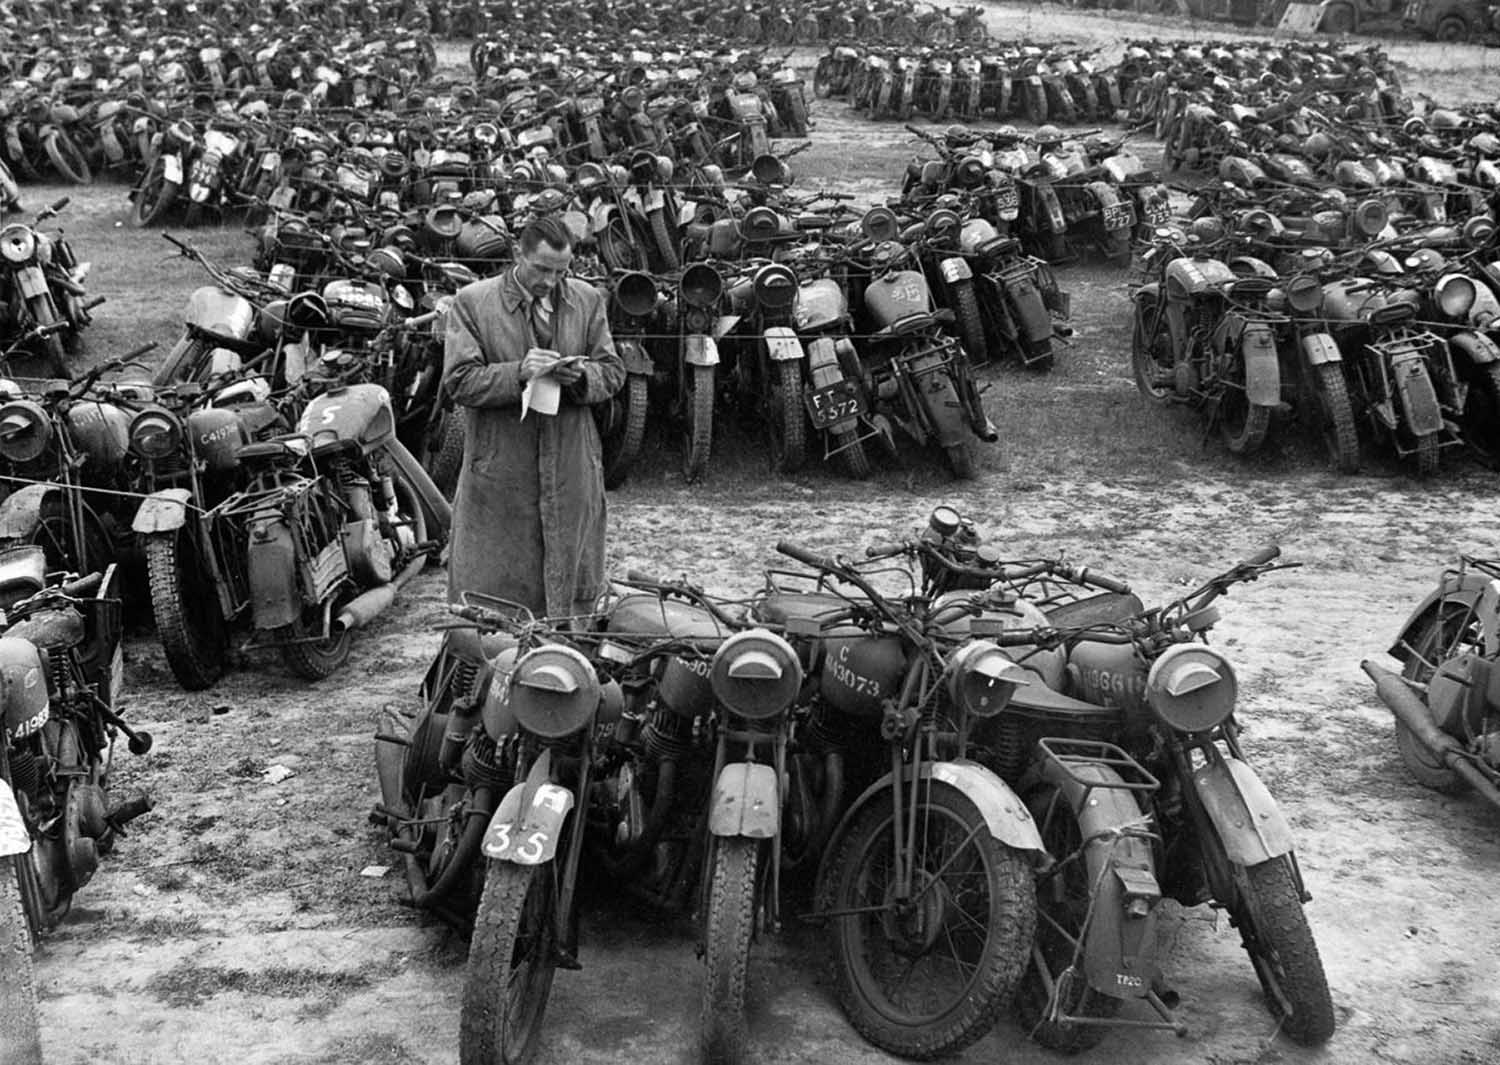 Surplus motorcycles in England are bundled in groups of five to be sold as scrap.